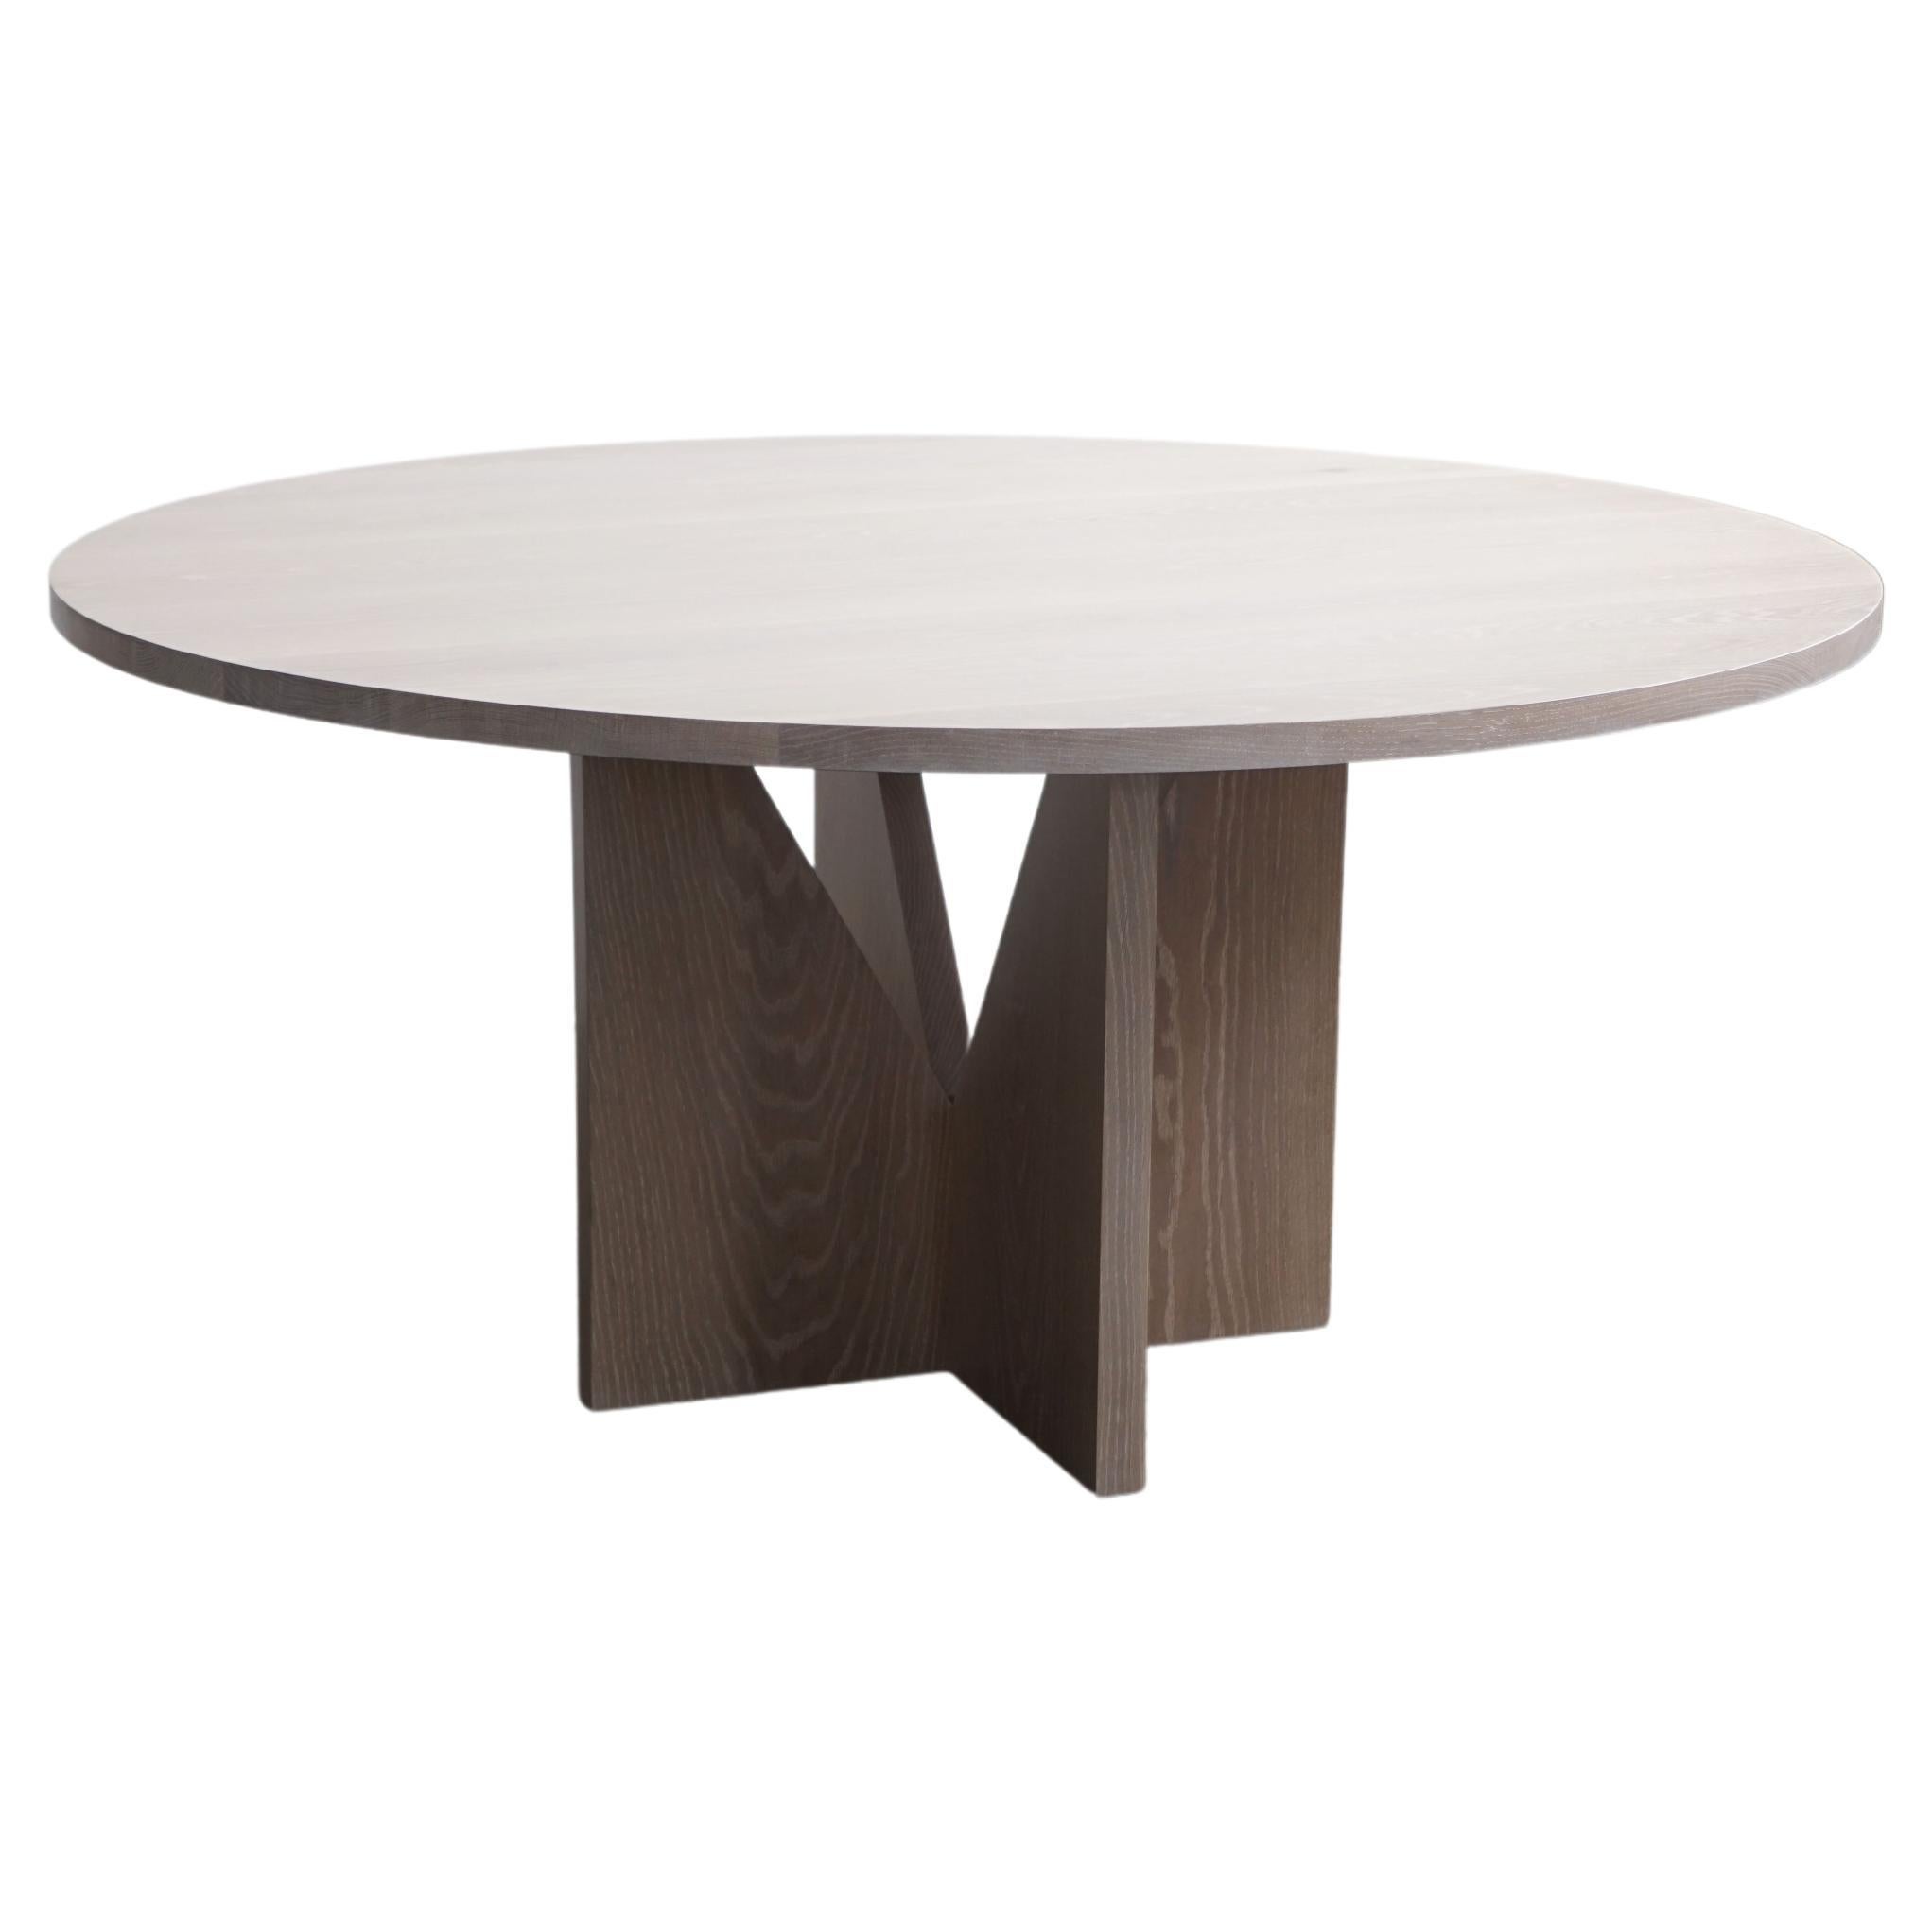 Contemporary Round Dining Table in White Oak Wood by Last Workshop, Minimalist For Sale